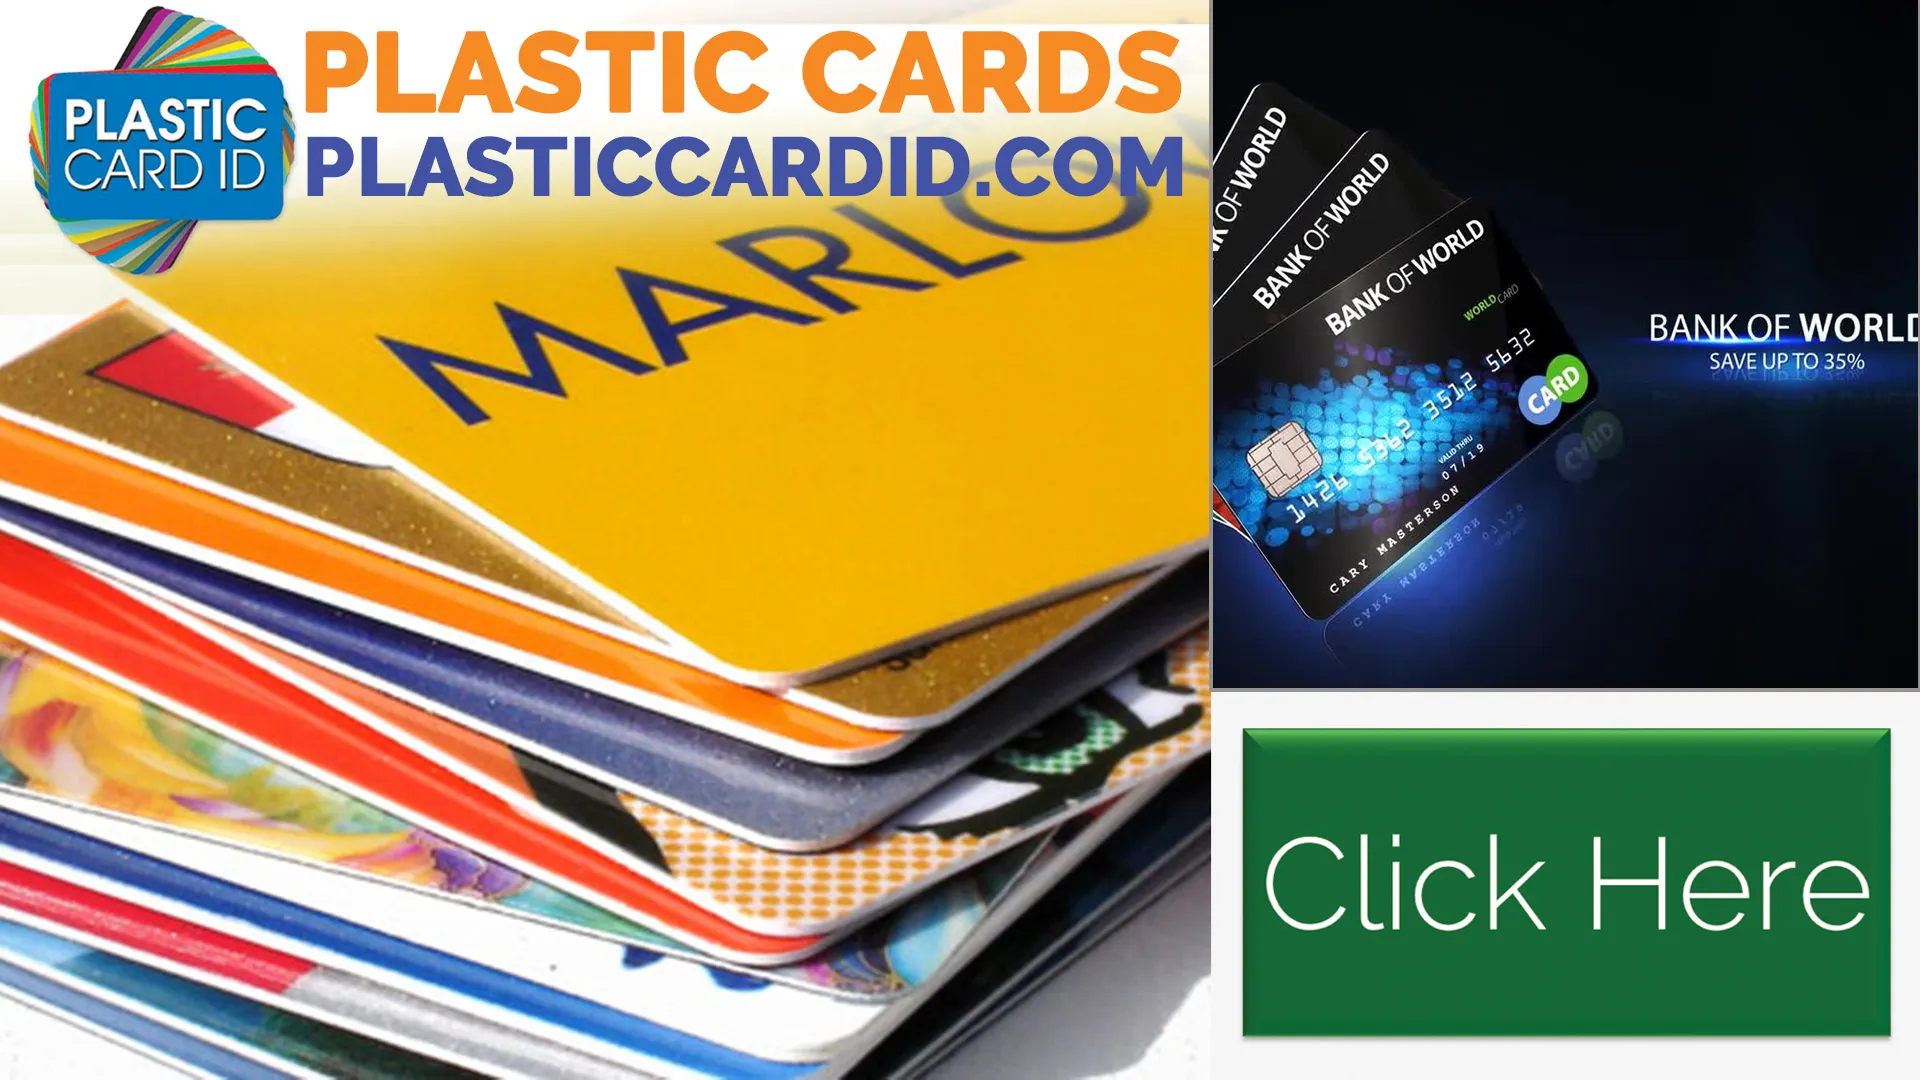 Discover the Perfect Plastic Card for Your Brand's Identity